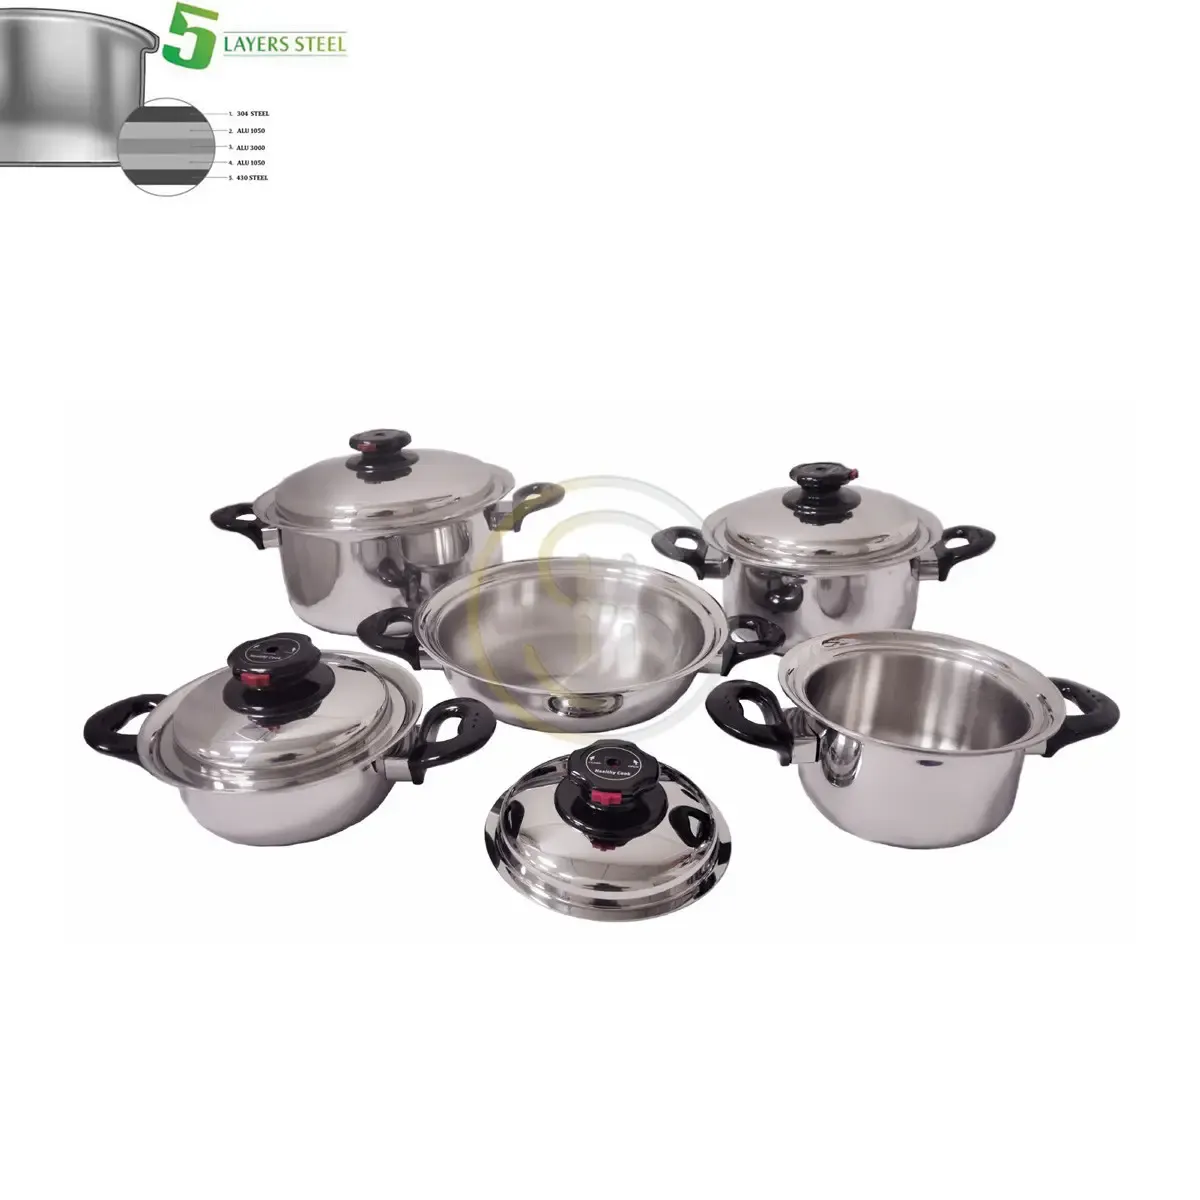 9PCS 5PLY ALL CLAD STEEL COOKWARE SET